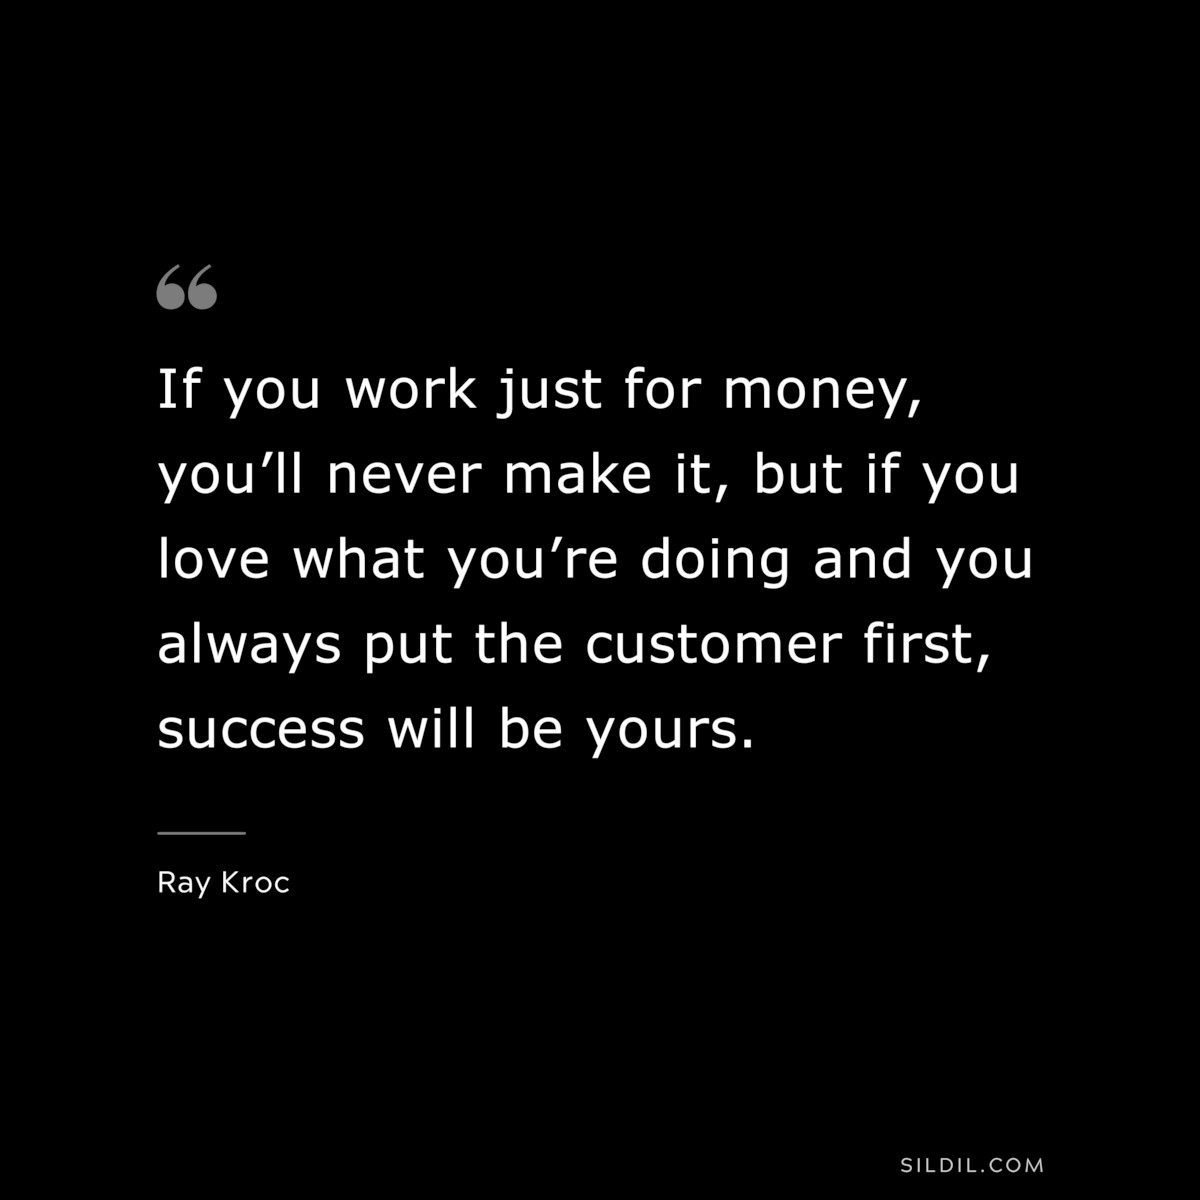 If you work just for money, you’ll never make it, but if you love what you’re doing and you always put the customer first, success will be yours. ― Ray Kroc